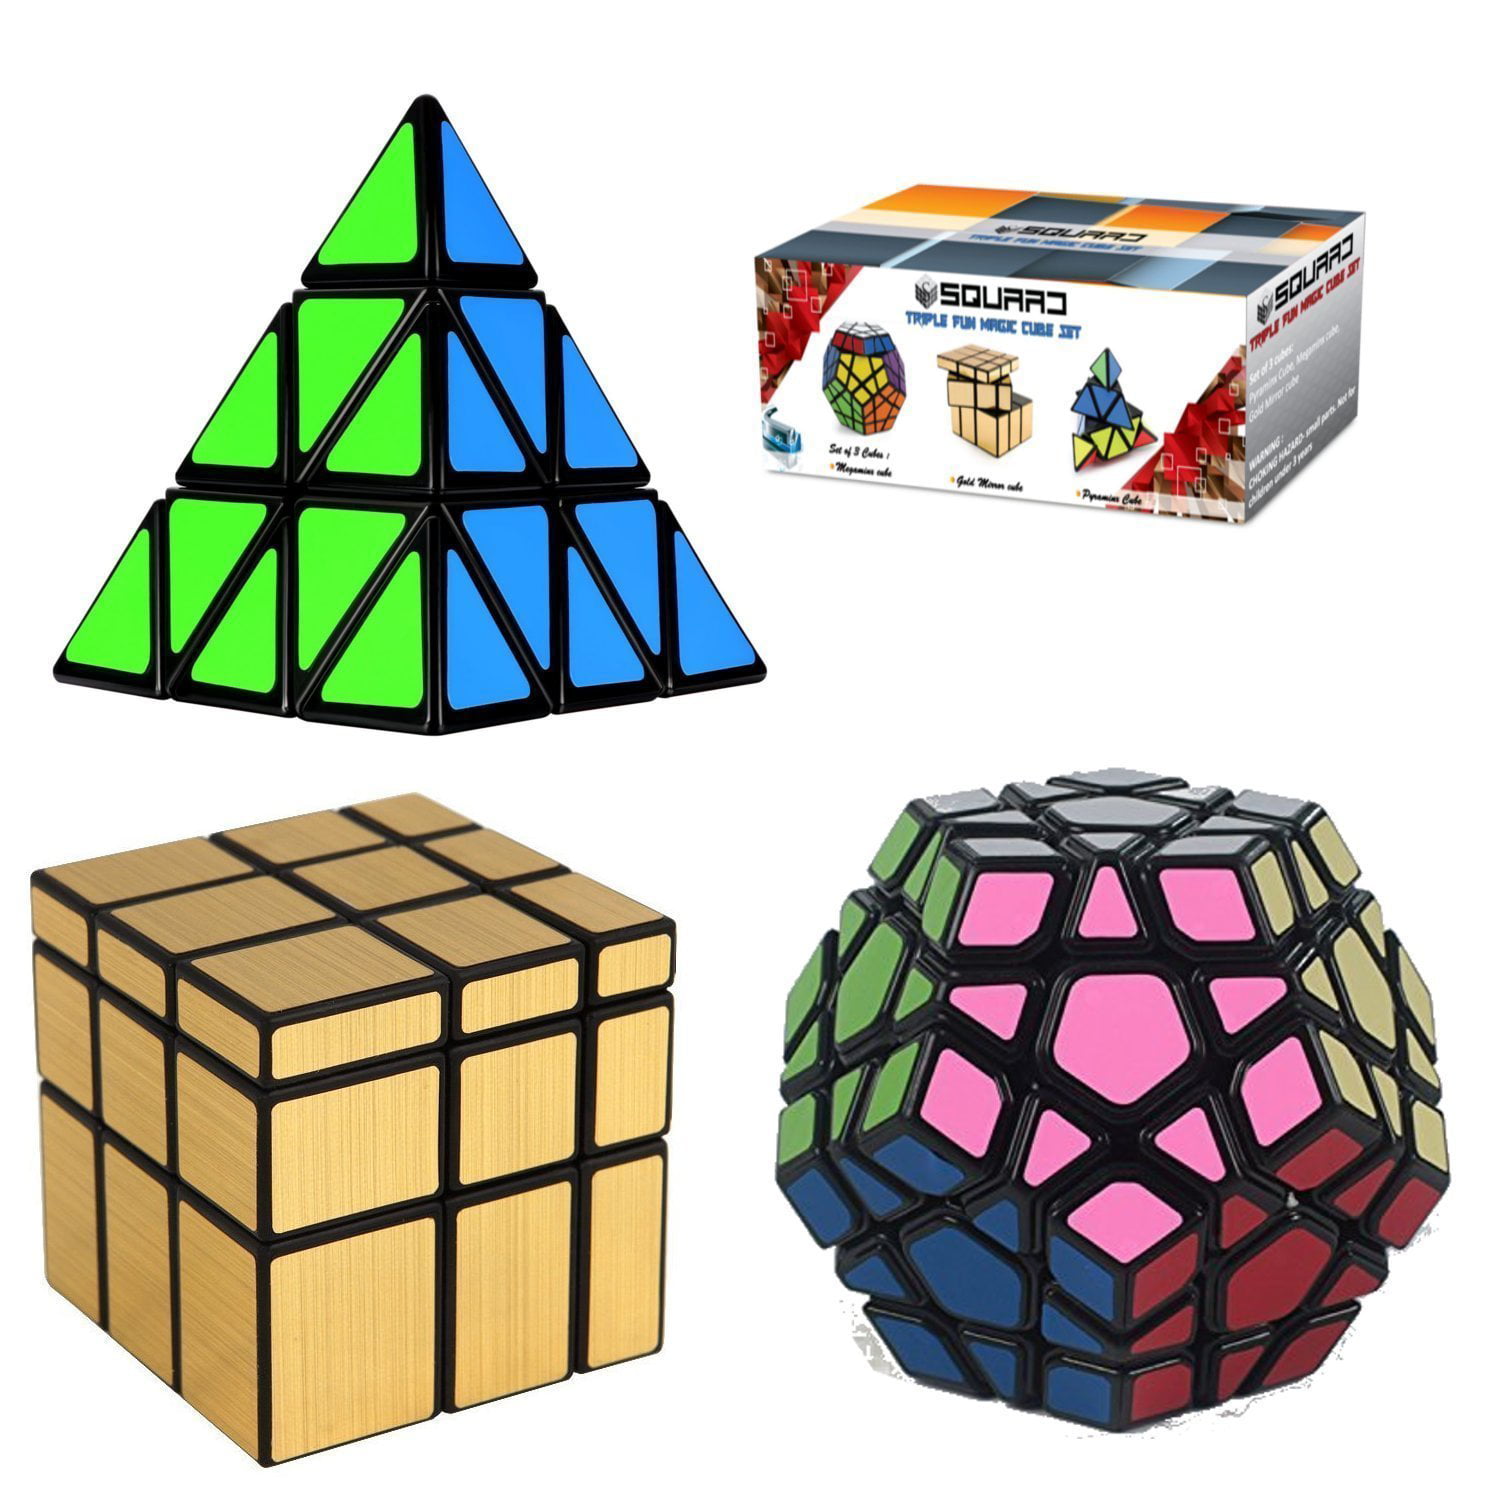 Squaad Magic Cube Set of 3 Popular Cubes bundles- Pyraminx Pyramid 3-d Puzzle cube Black Megaminx Cube and Gold Mirror Cube Great Entertainment For Adults and Kids